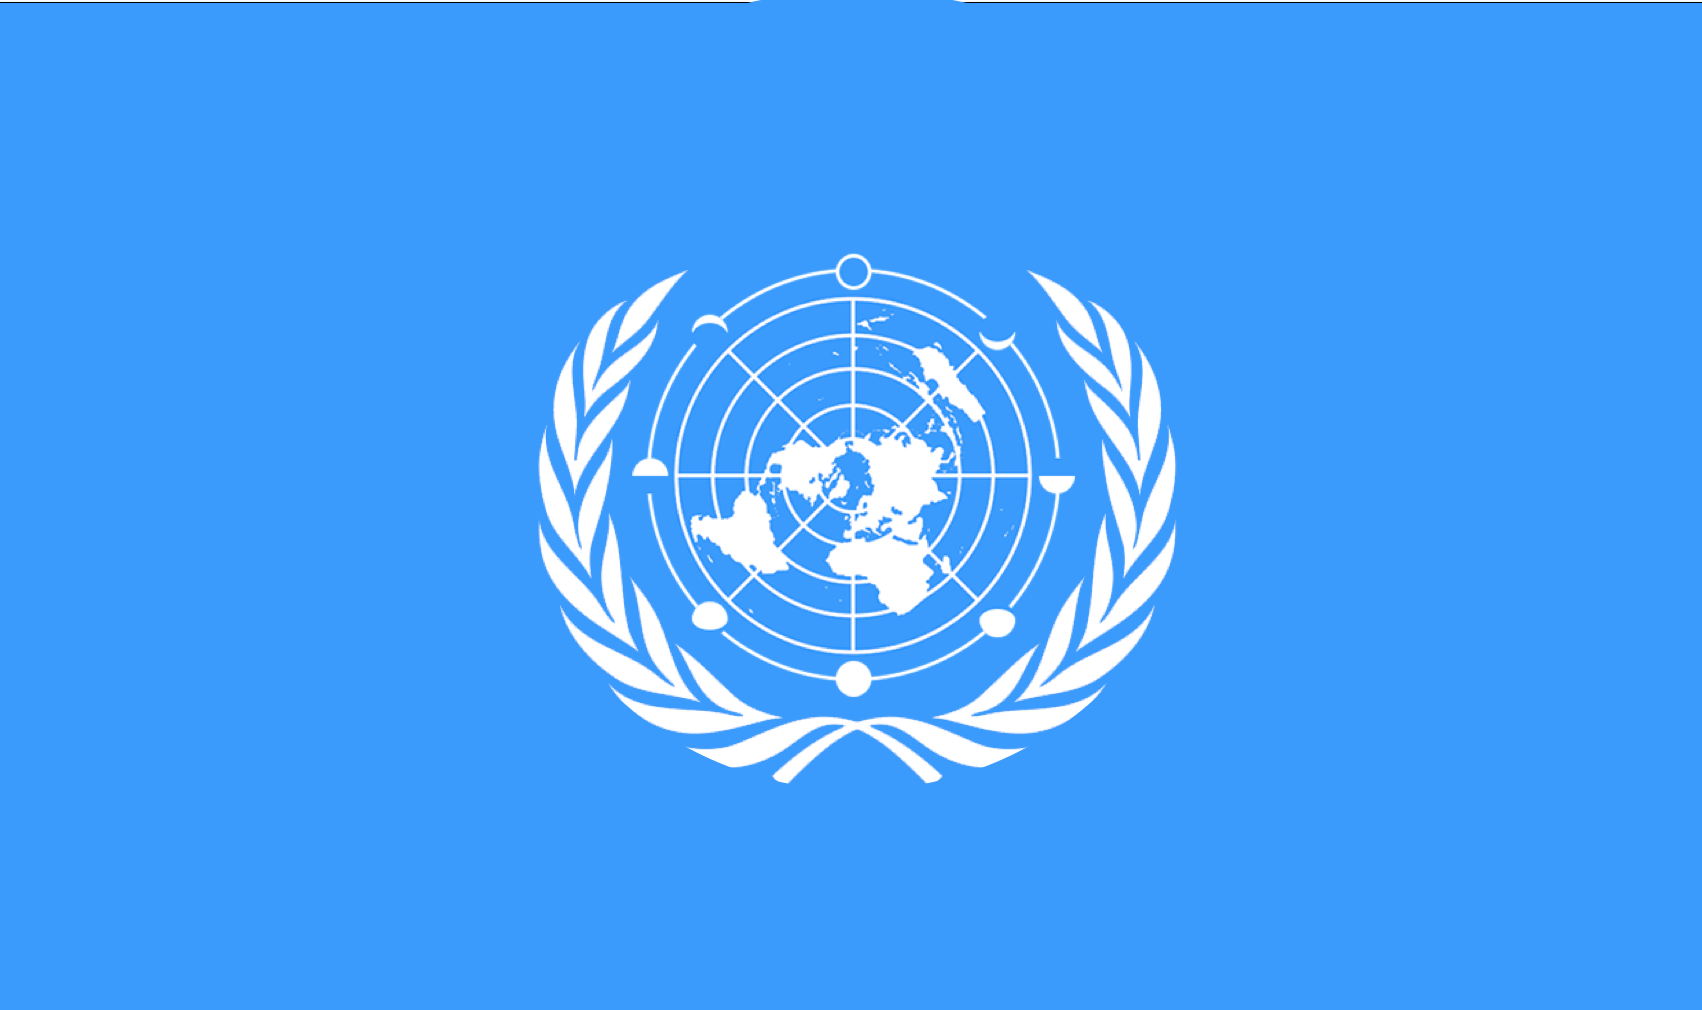 Un Flag Logo - Made IMHO a better UN flag Without the words 